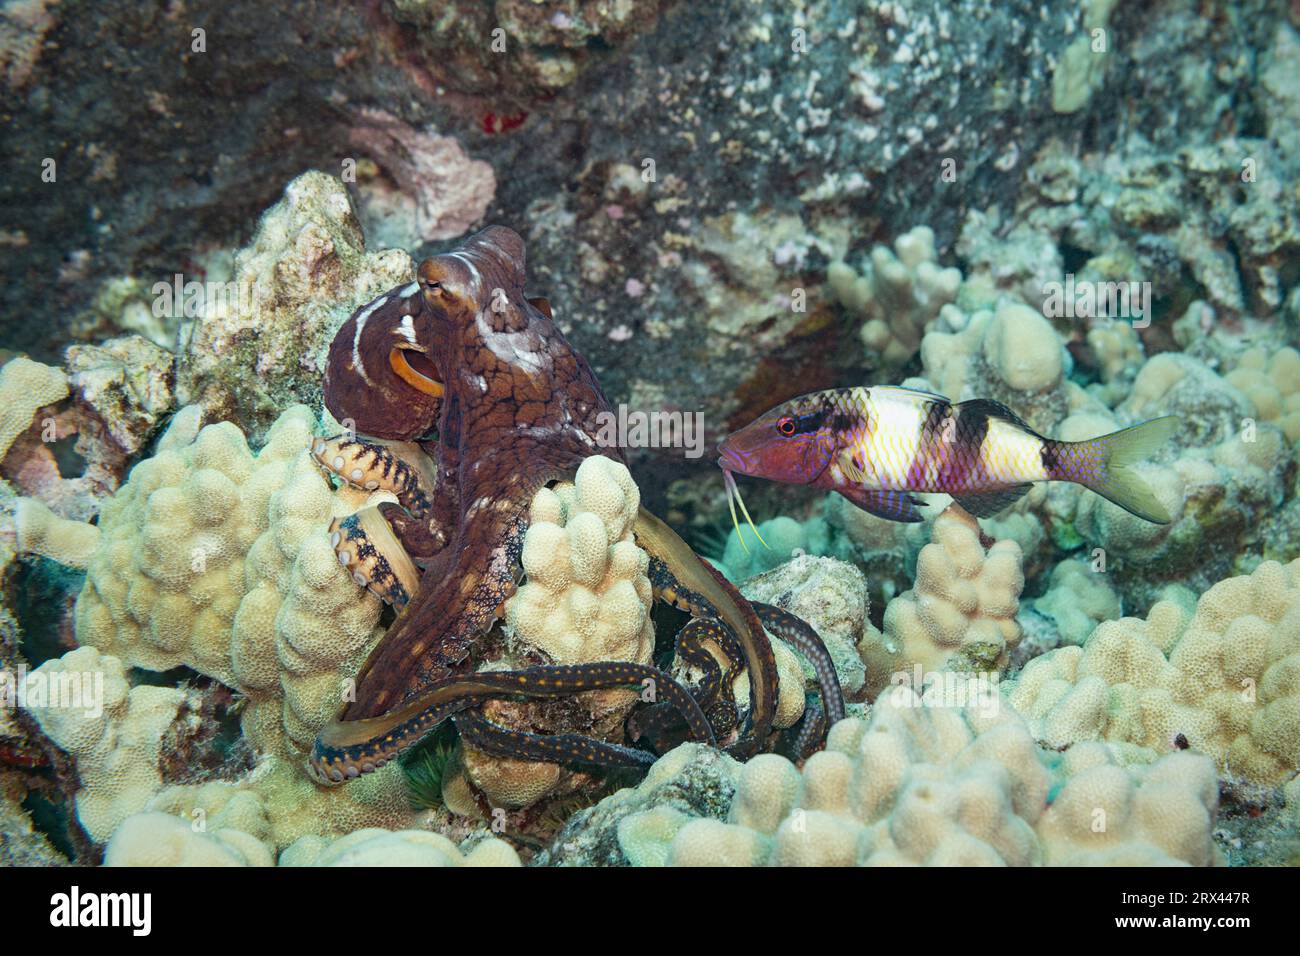 day octopus, Octopus cyanea, flushes partly white hunting on coral reef; commensal manybar goatfish hopes to seize any small fish that escape, Hawaii Stock Photo